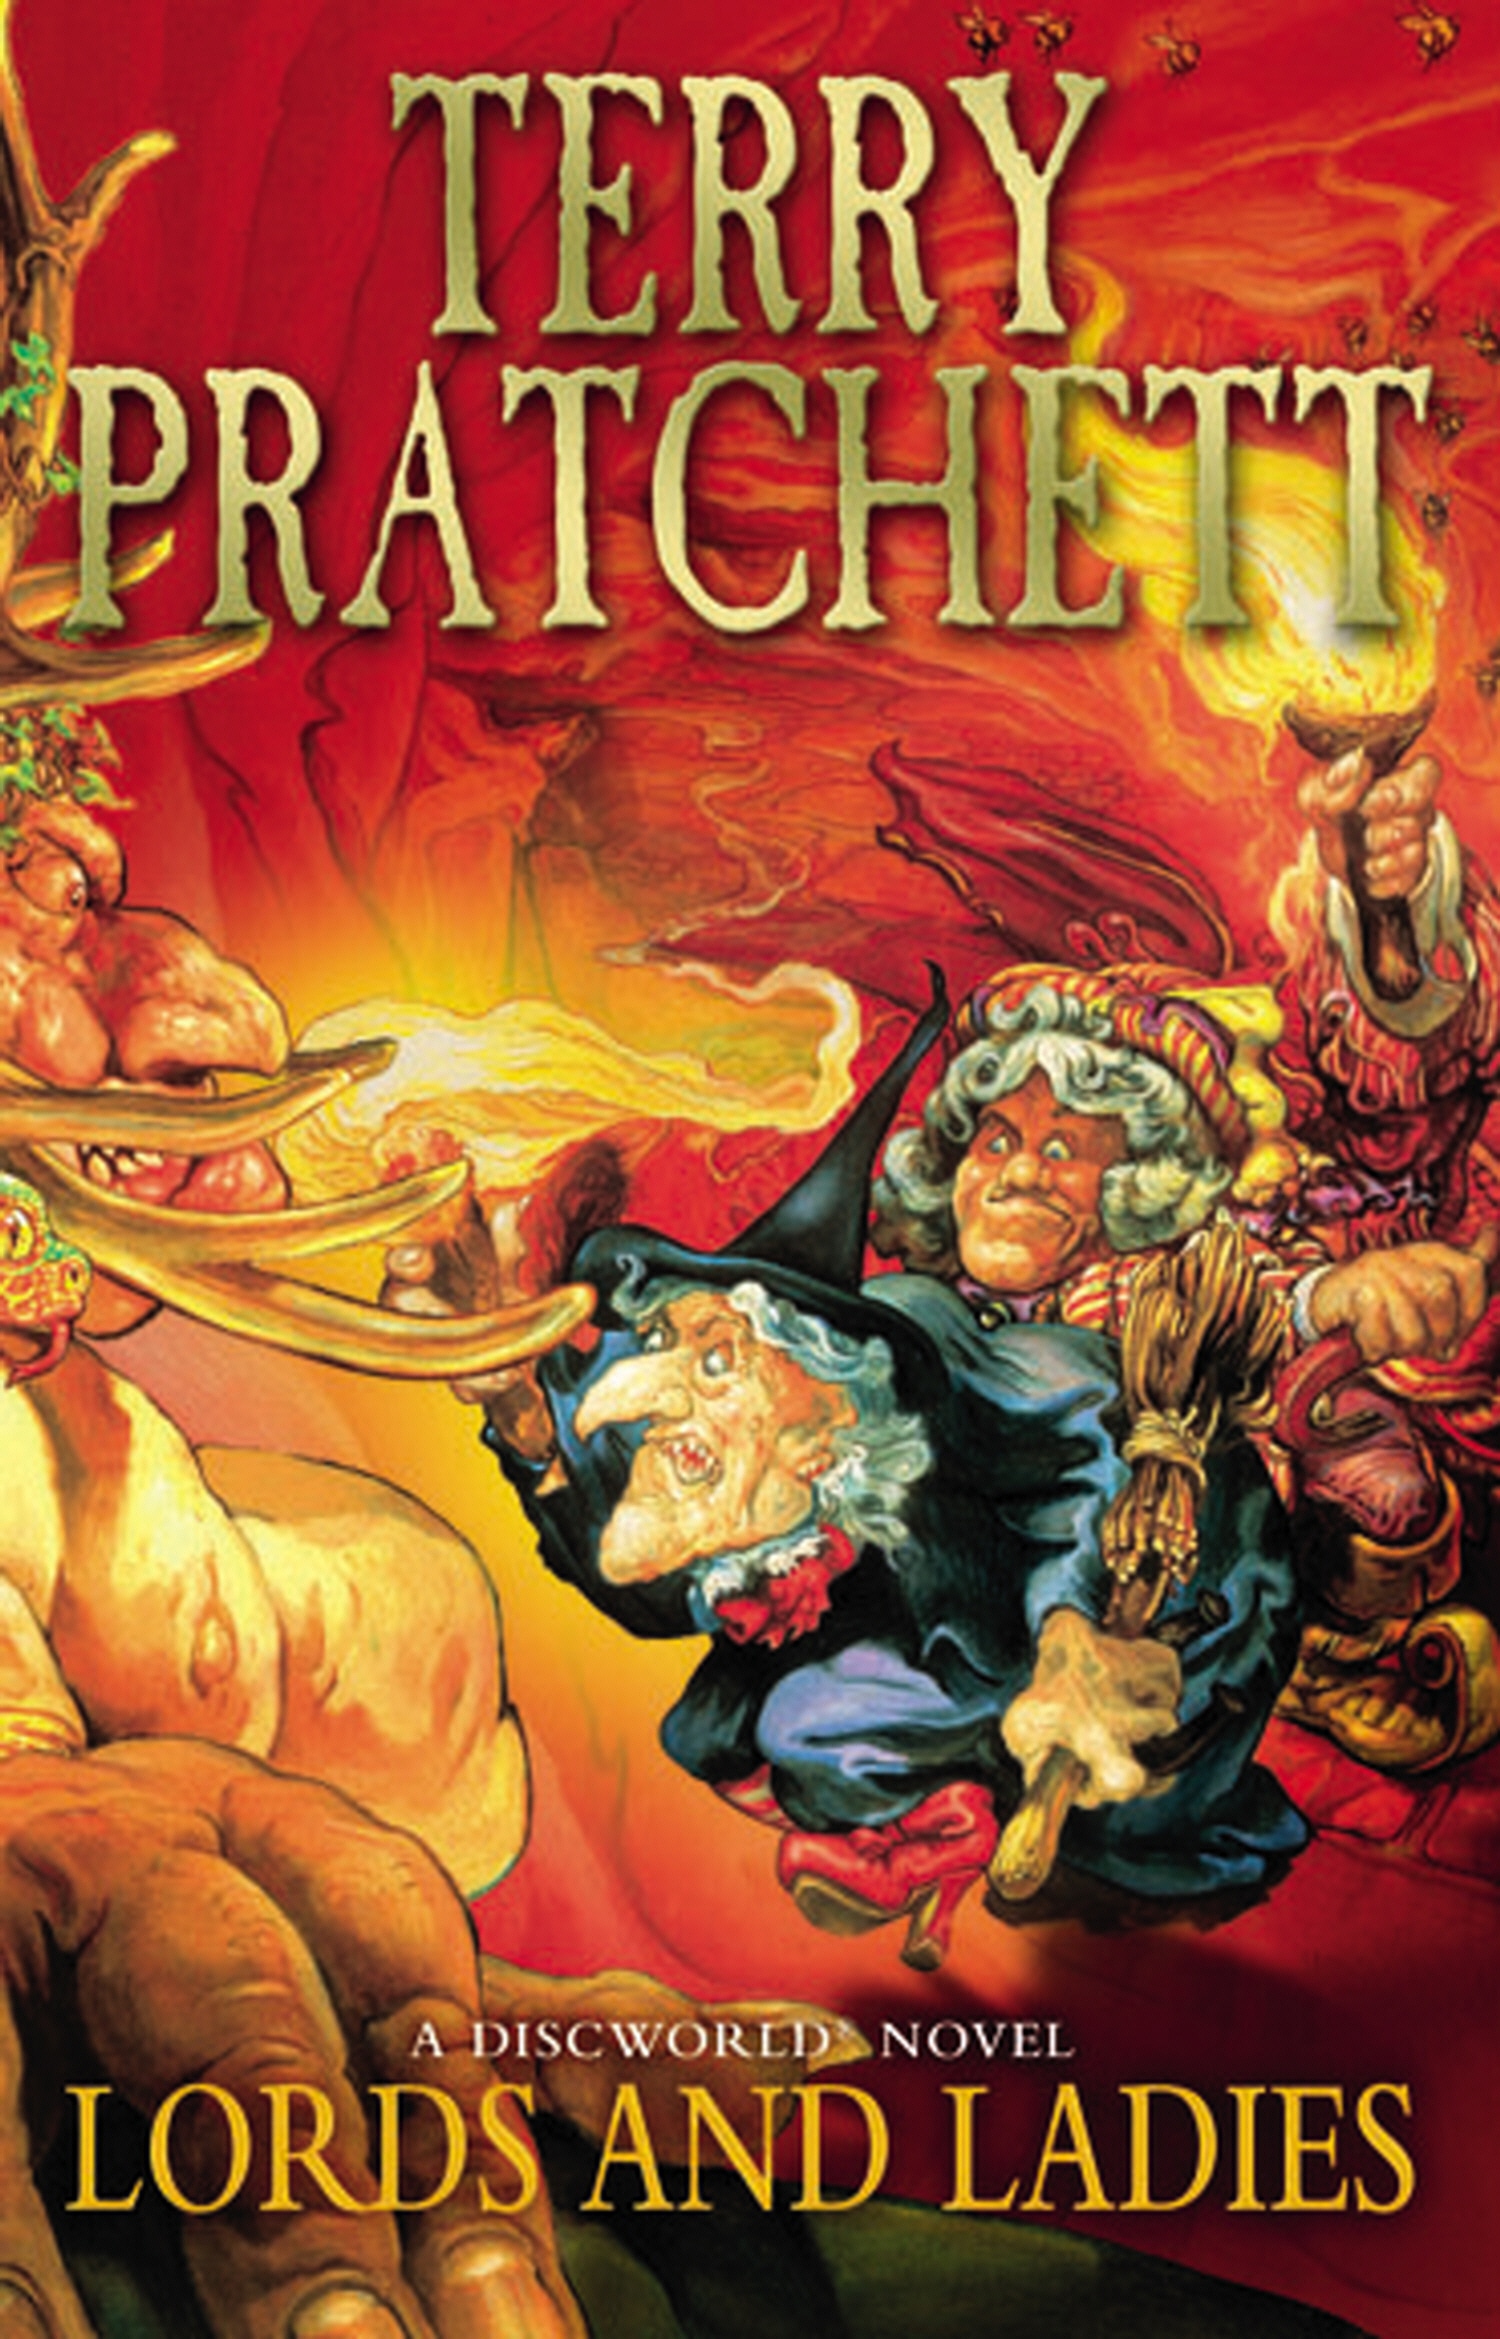 Book “Lords And Ladies” by Terry Pratchett — February 14, 2013